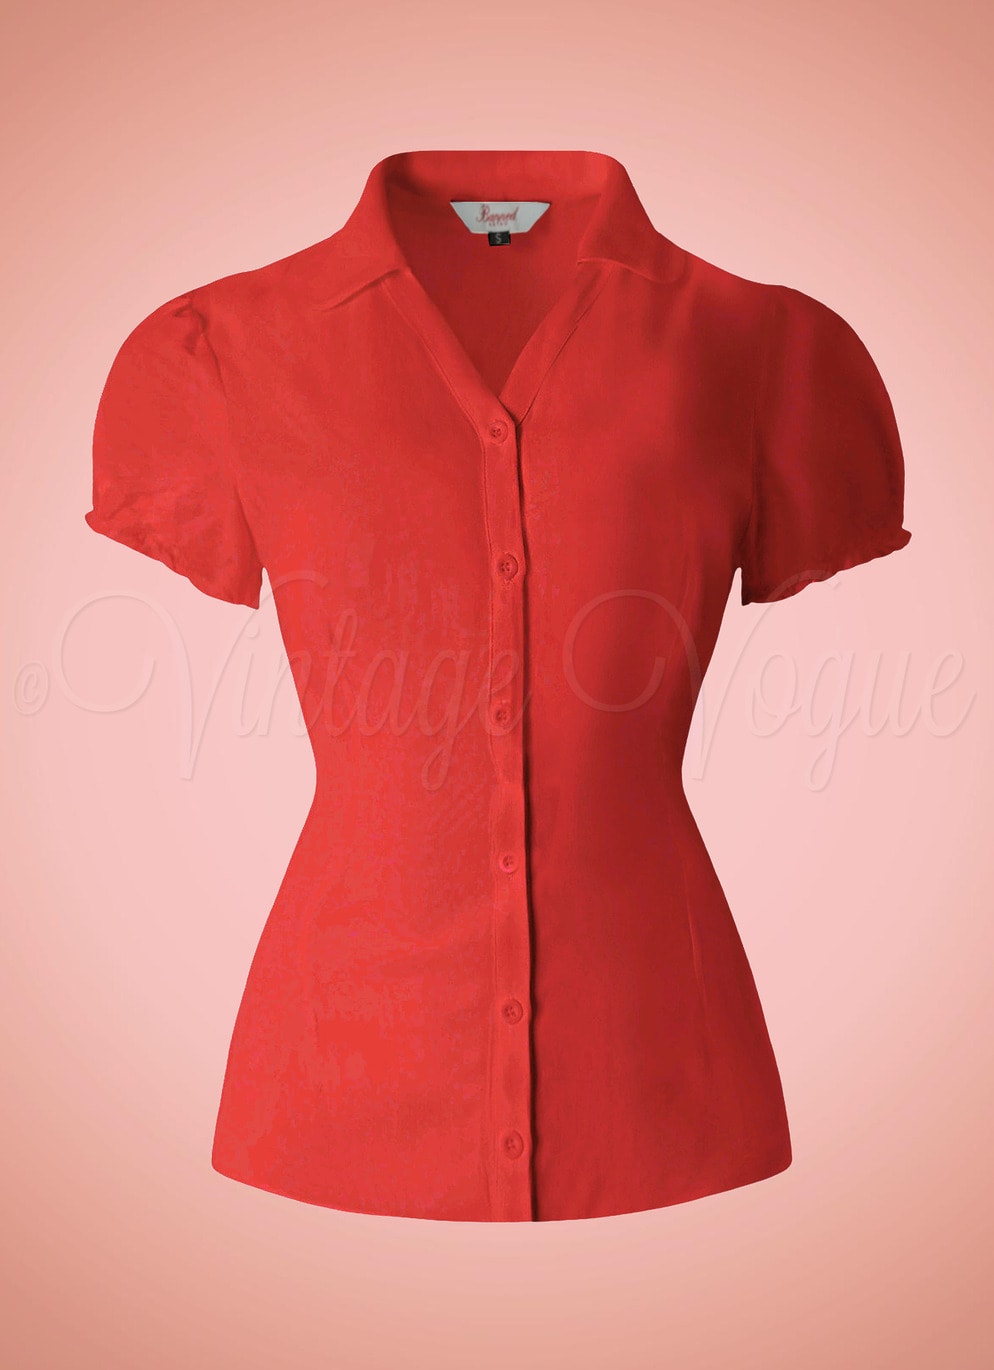 Banned Banned Retro Vintage Basic Bluse Jane Blouse in Rot BL14147-RED